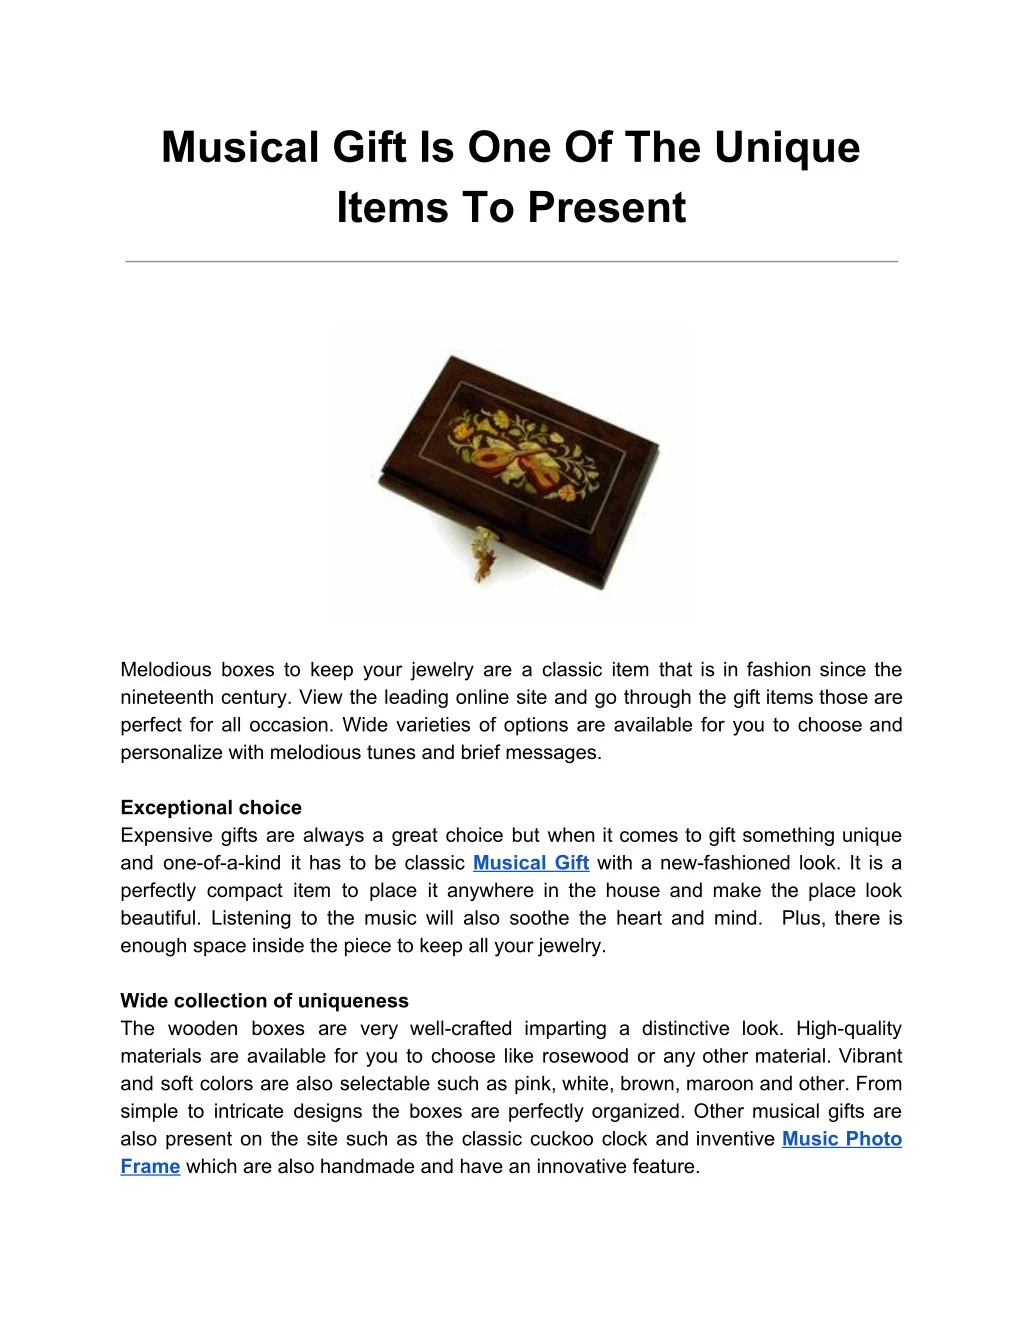 musical gift is one of the unique items to present